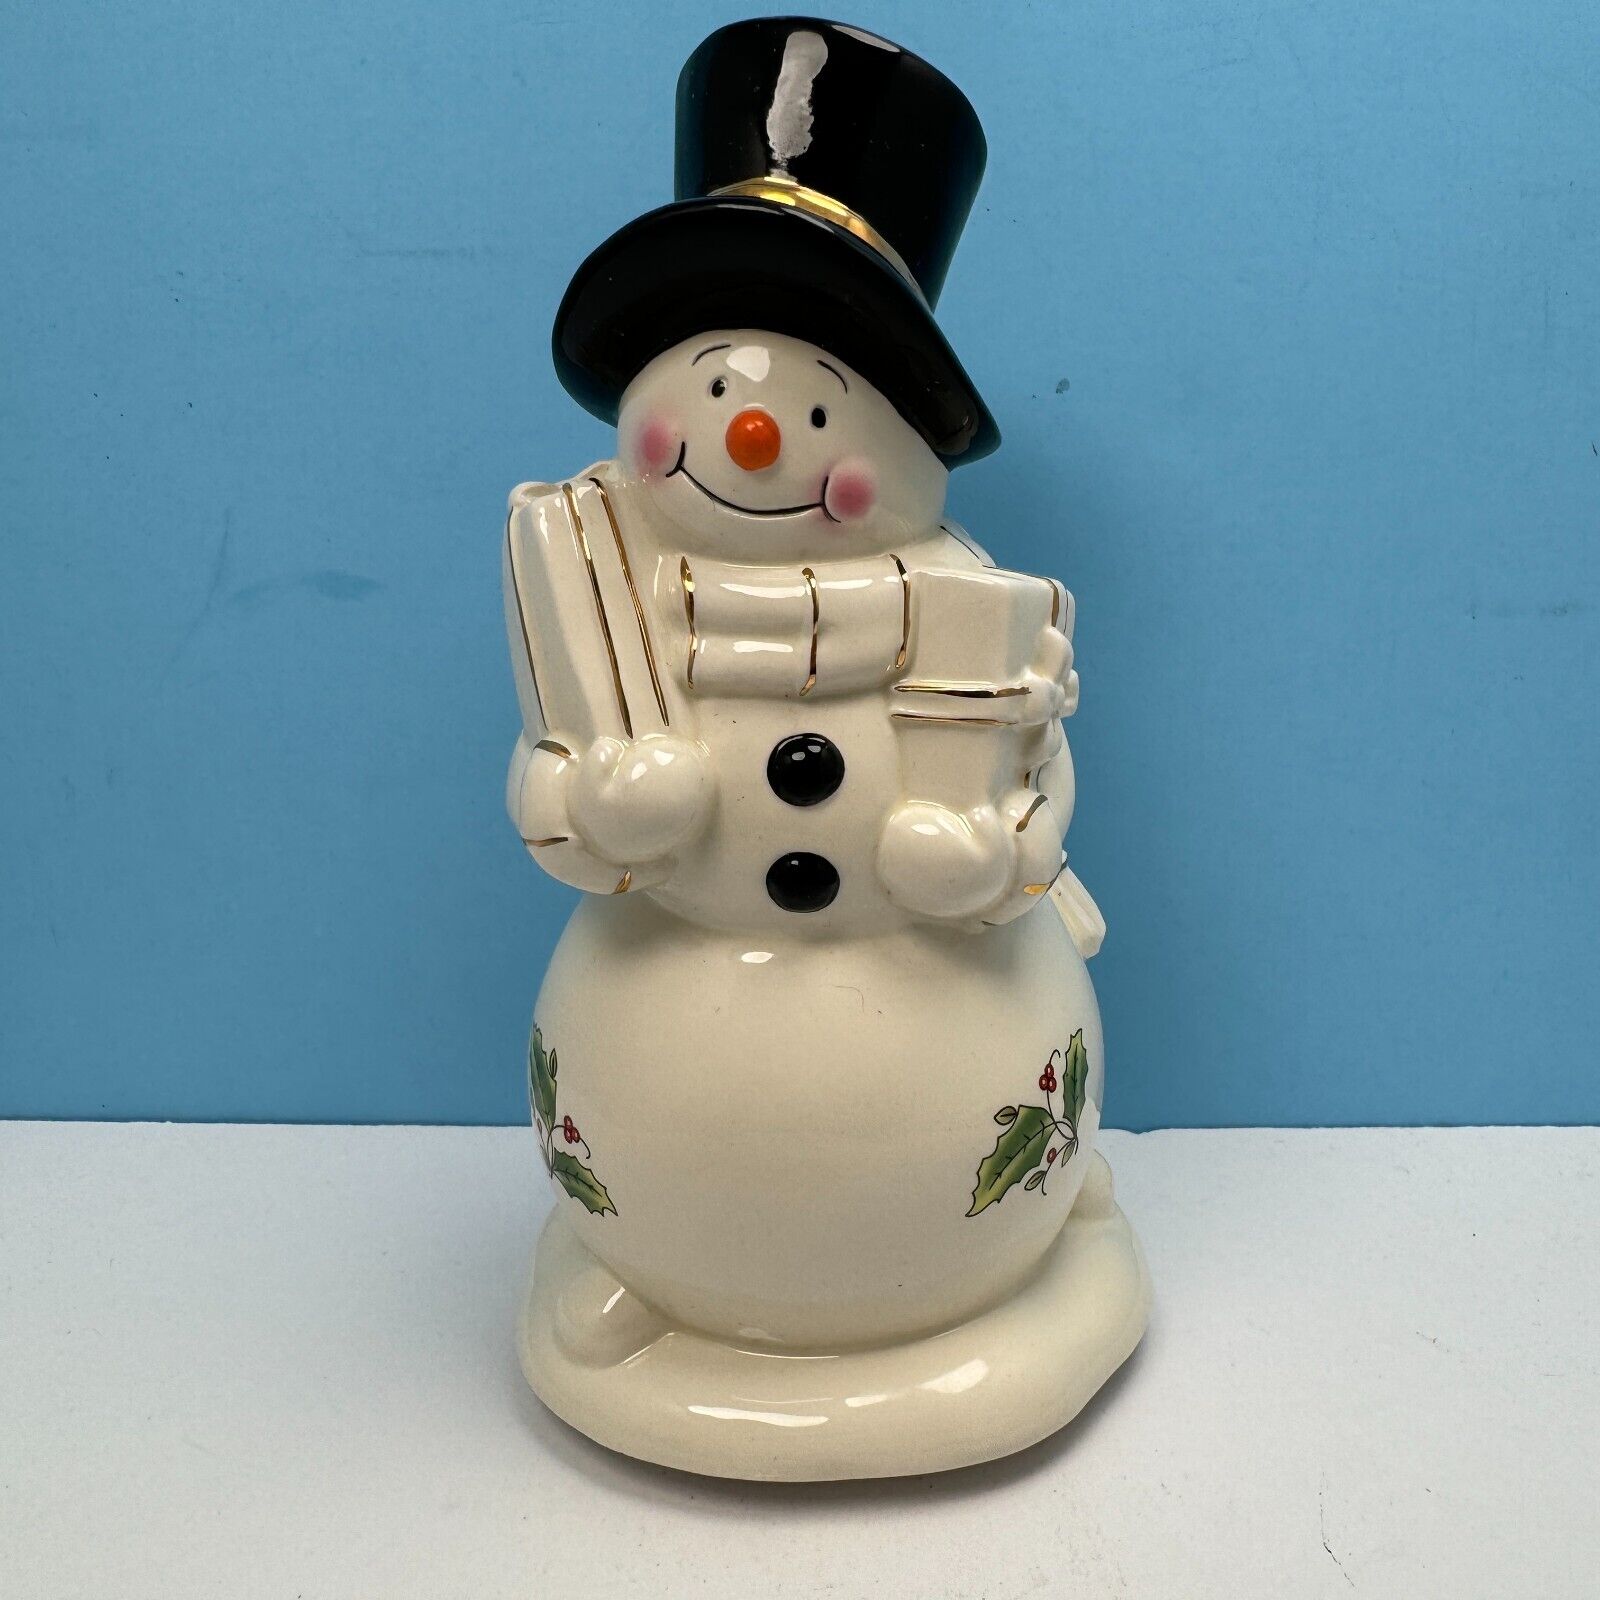 FROSTY THE SNOWMAN musical plays “Frosty the Snowman”, by Home for the Holidays